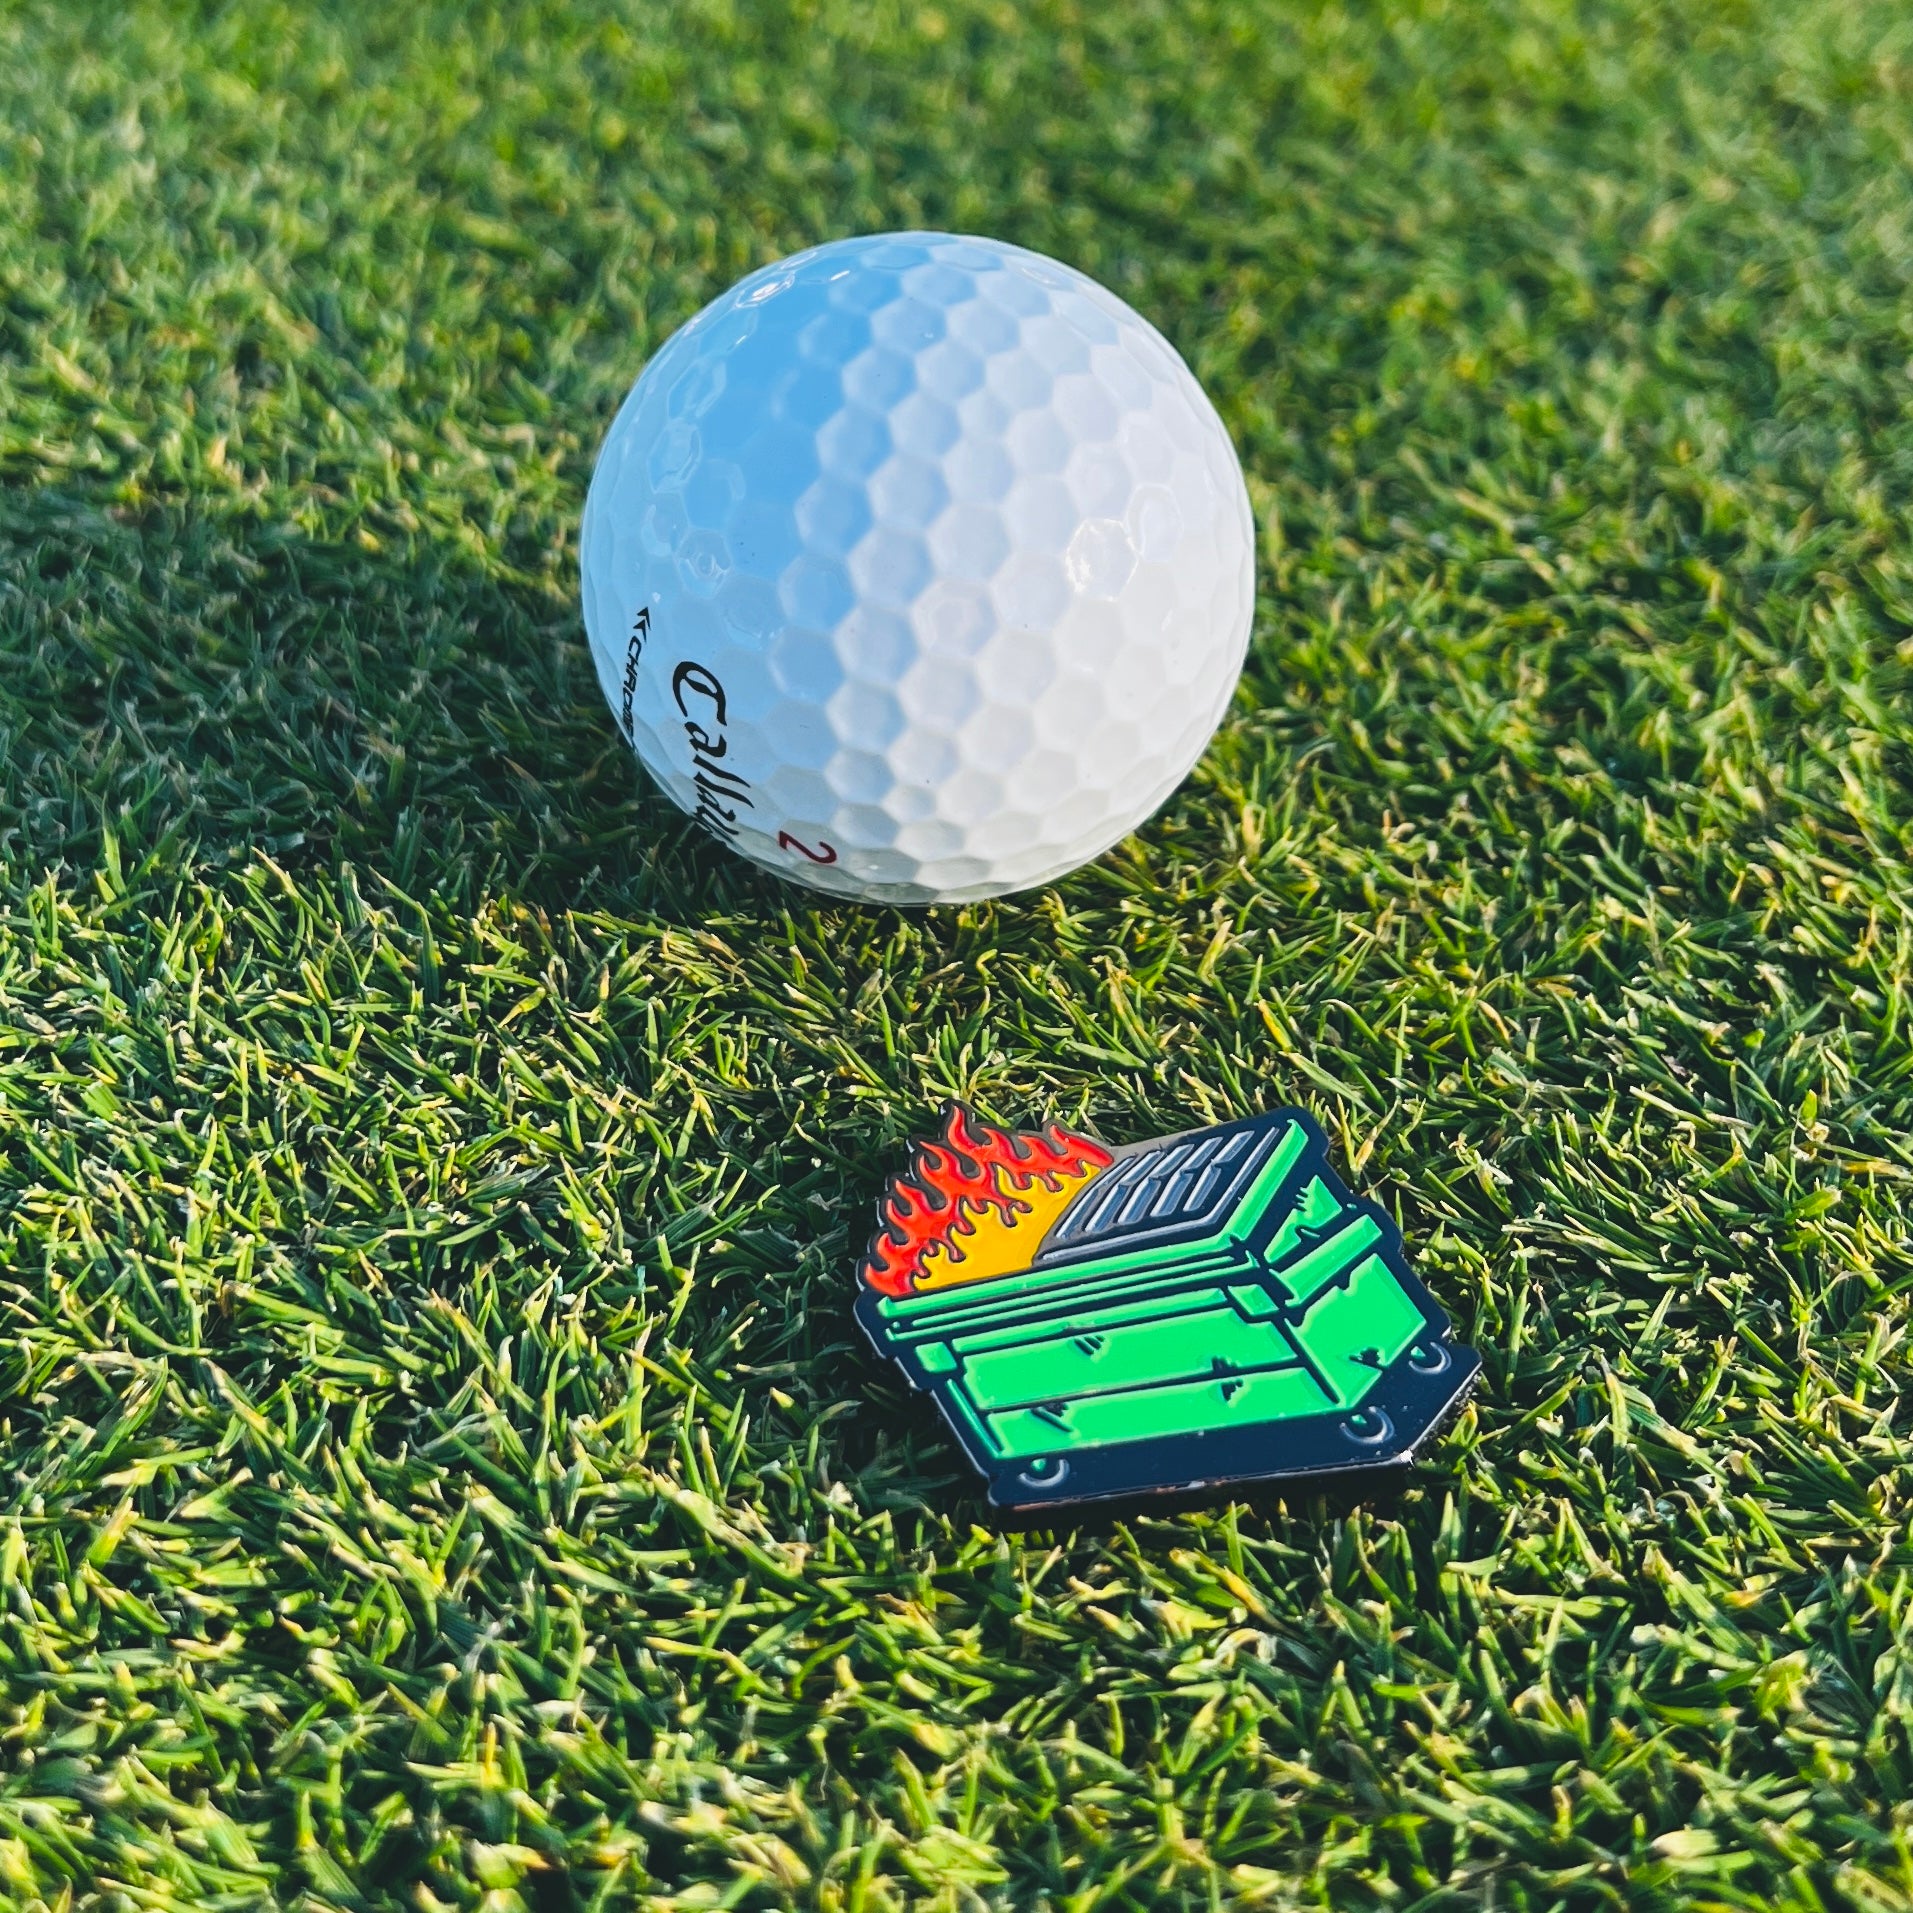 a dumpster fire golf ball marker sitting on the ground behind a golf ball on the green